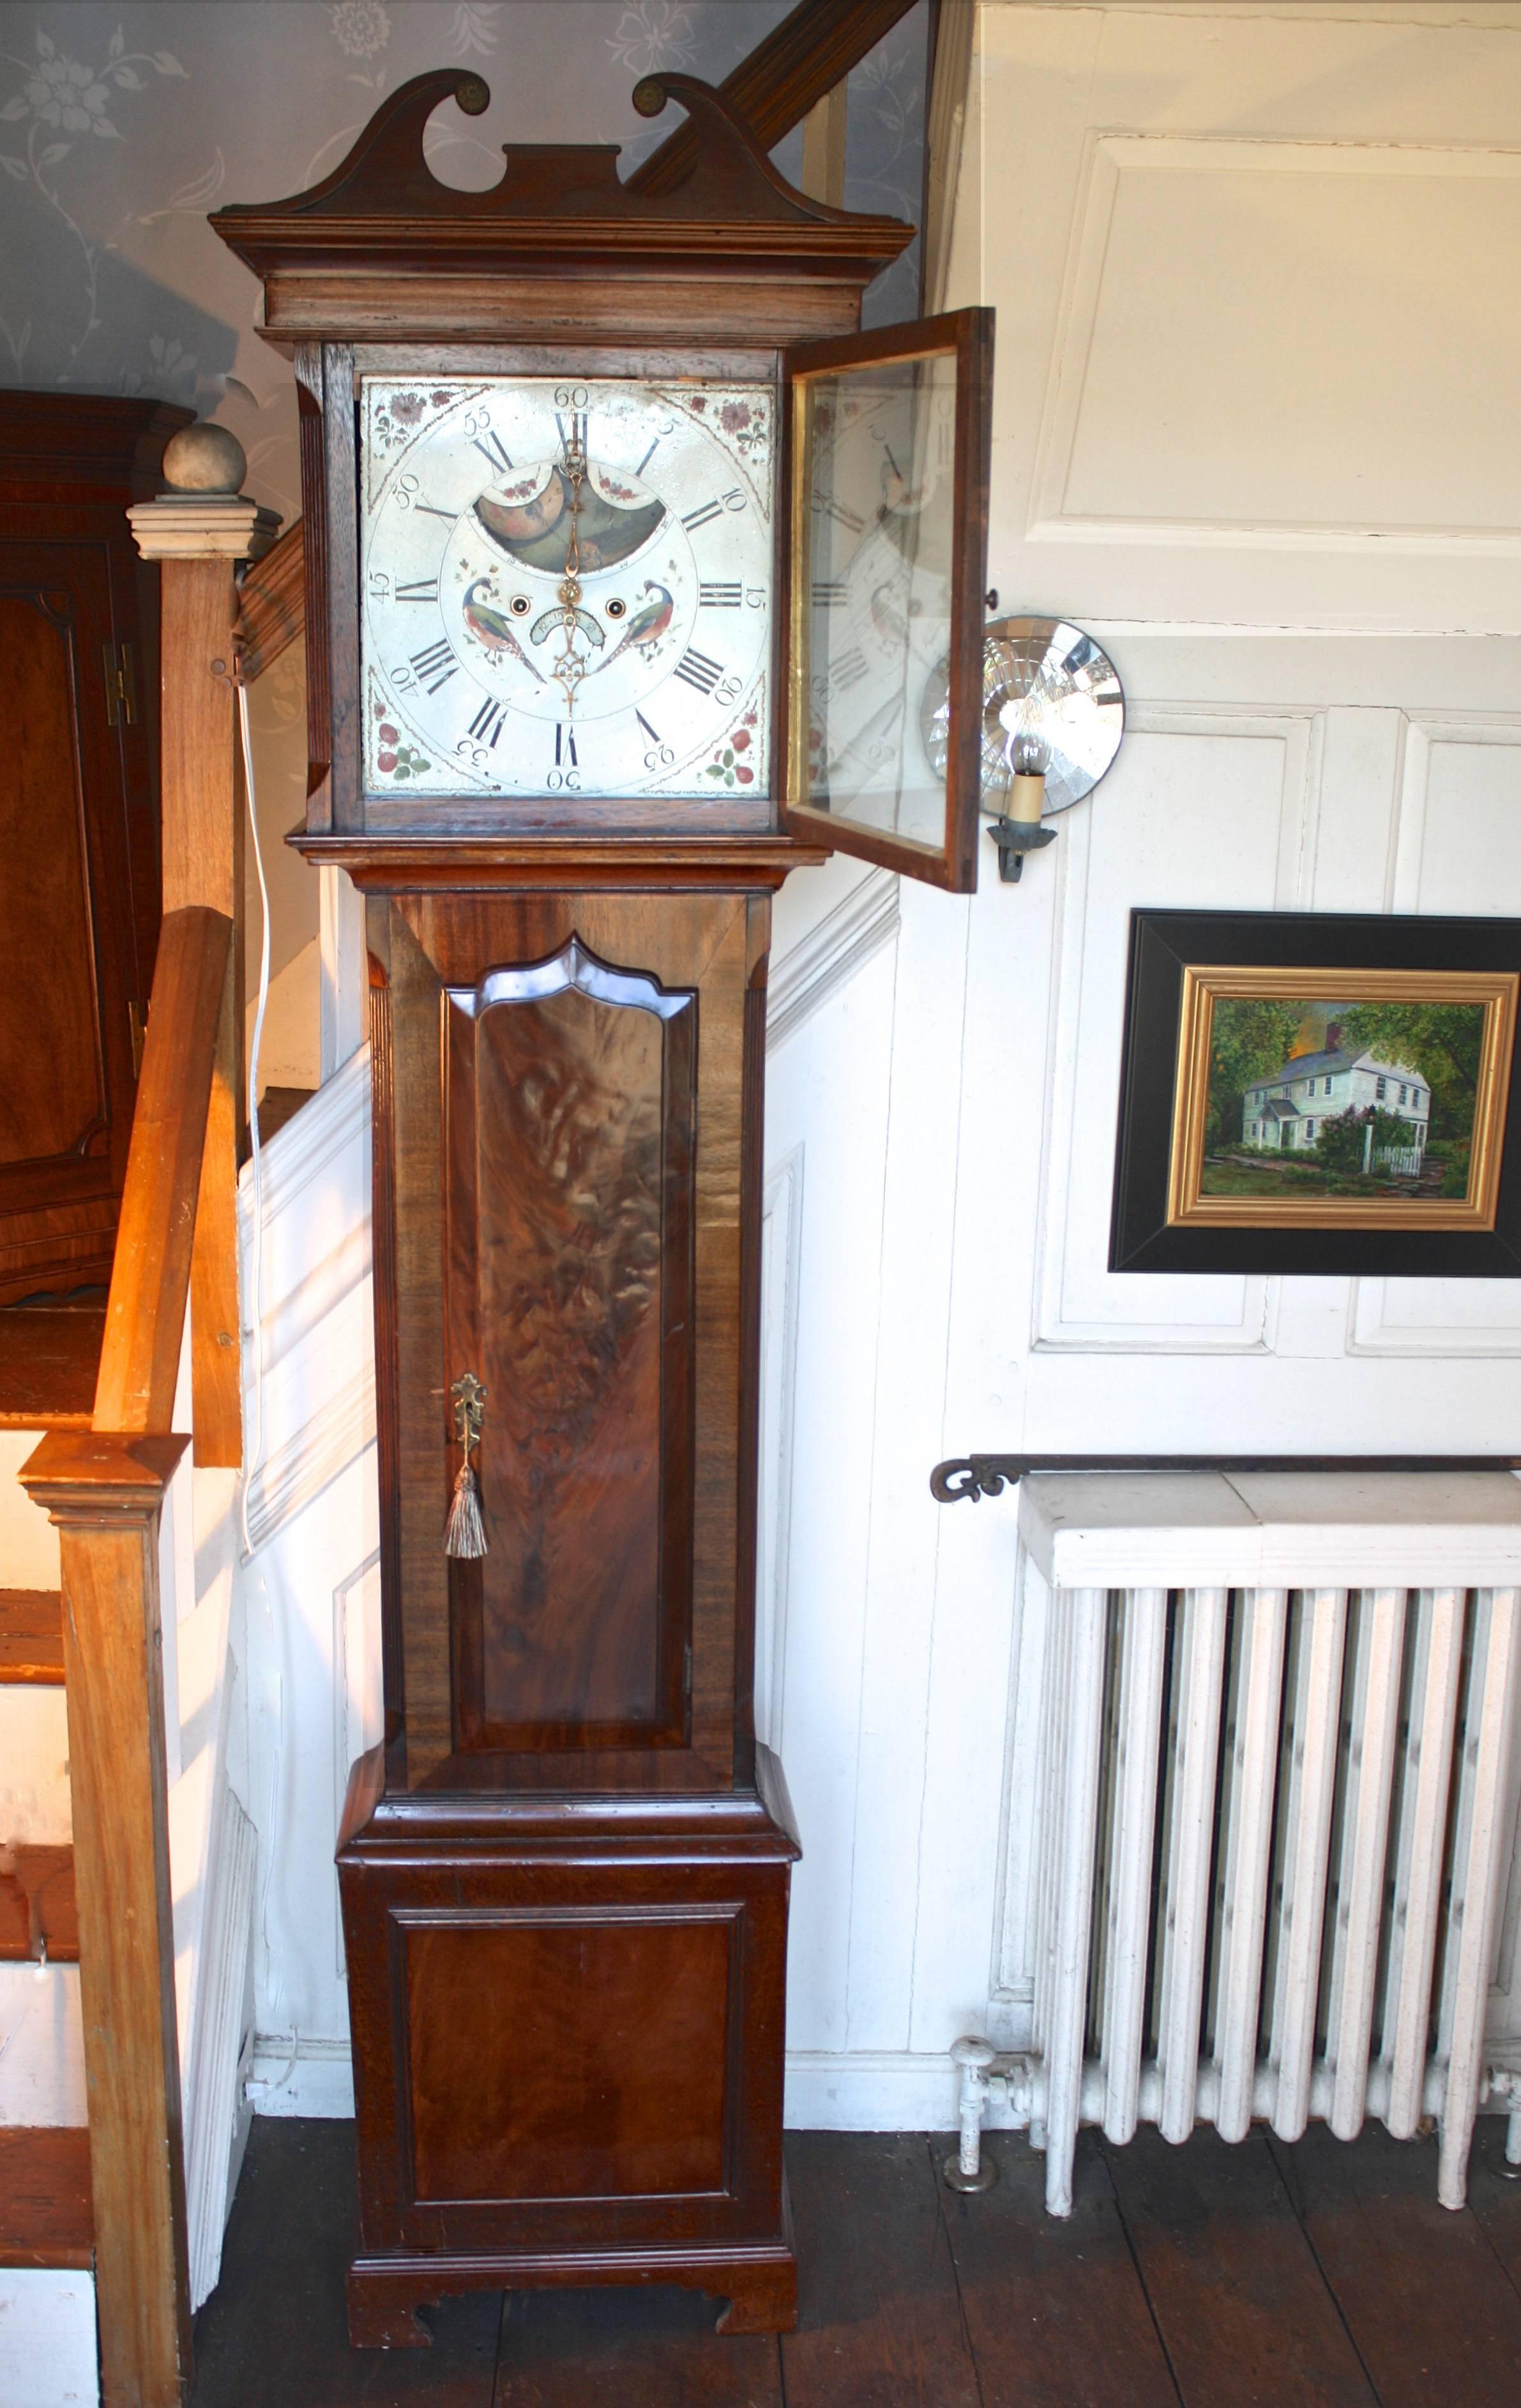 A seven foot tall Regency period clock with a finely detailed mahogany case and paint decorated face. The mahogany case includes solids as well as crotch and flame veneers, with wide grained bandings.  The complex elements of its face paint